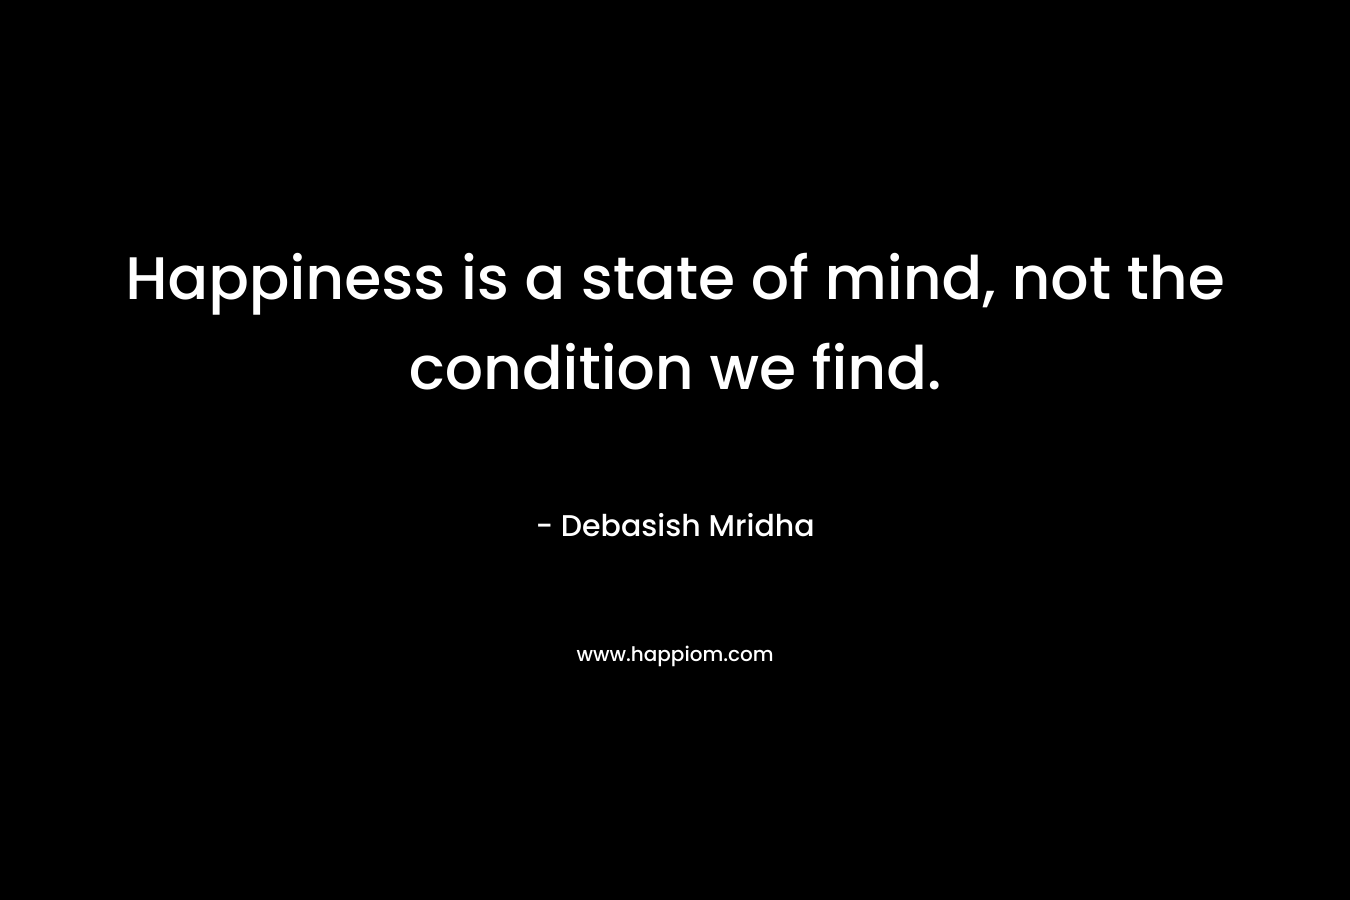 Happiness is a state of mind, not the condition we find.